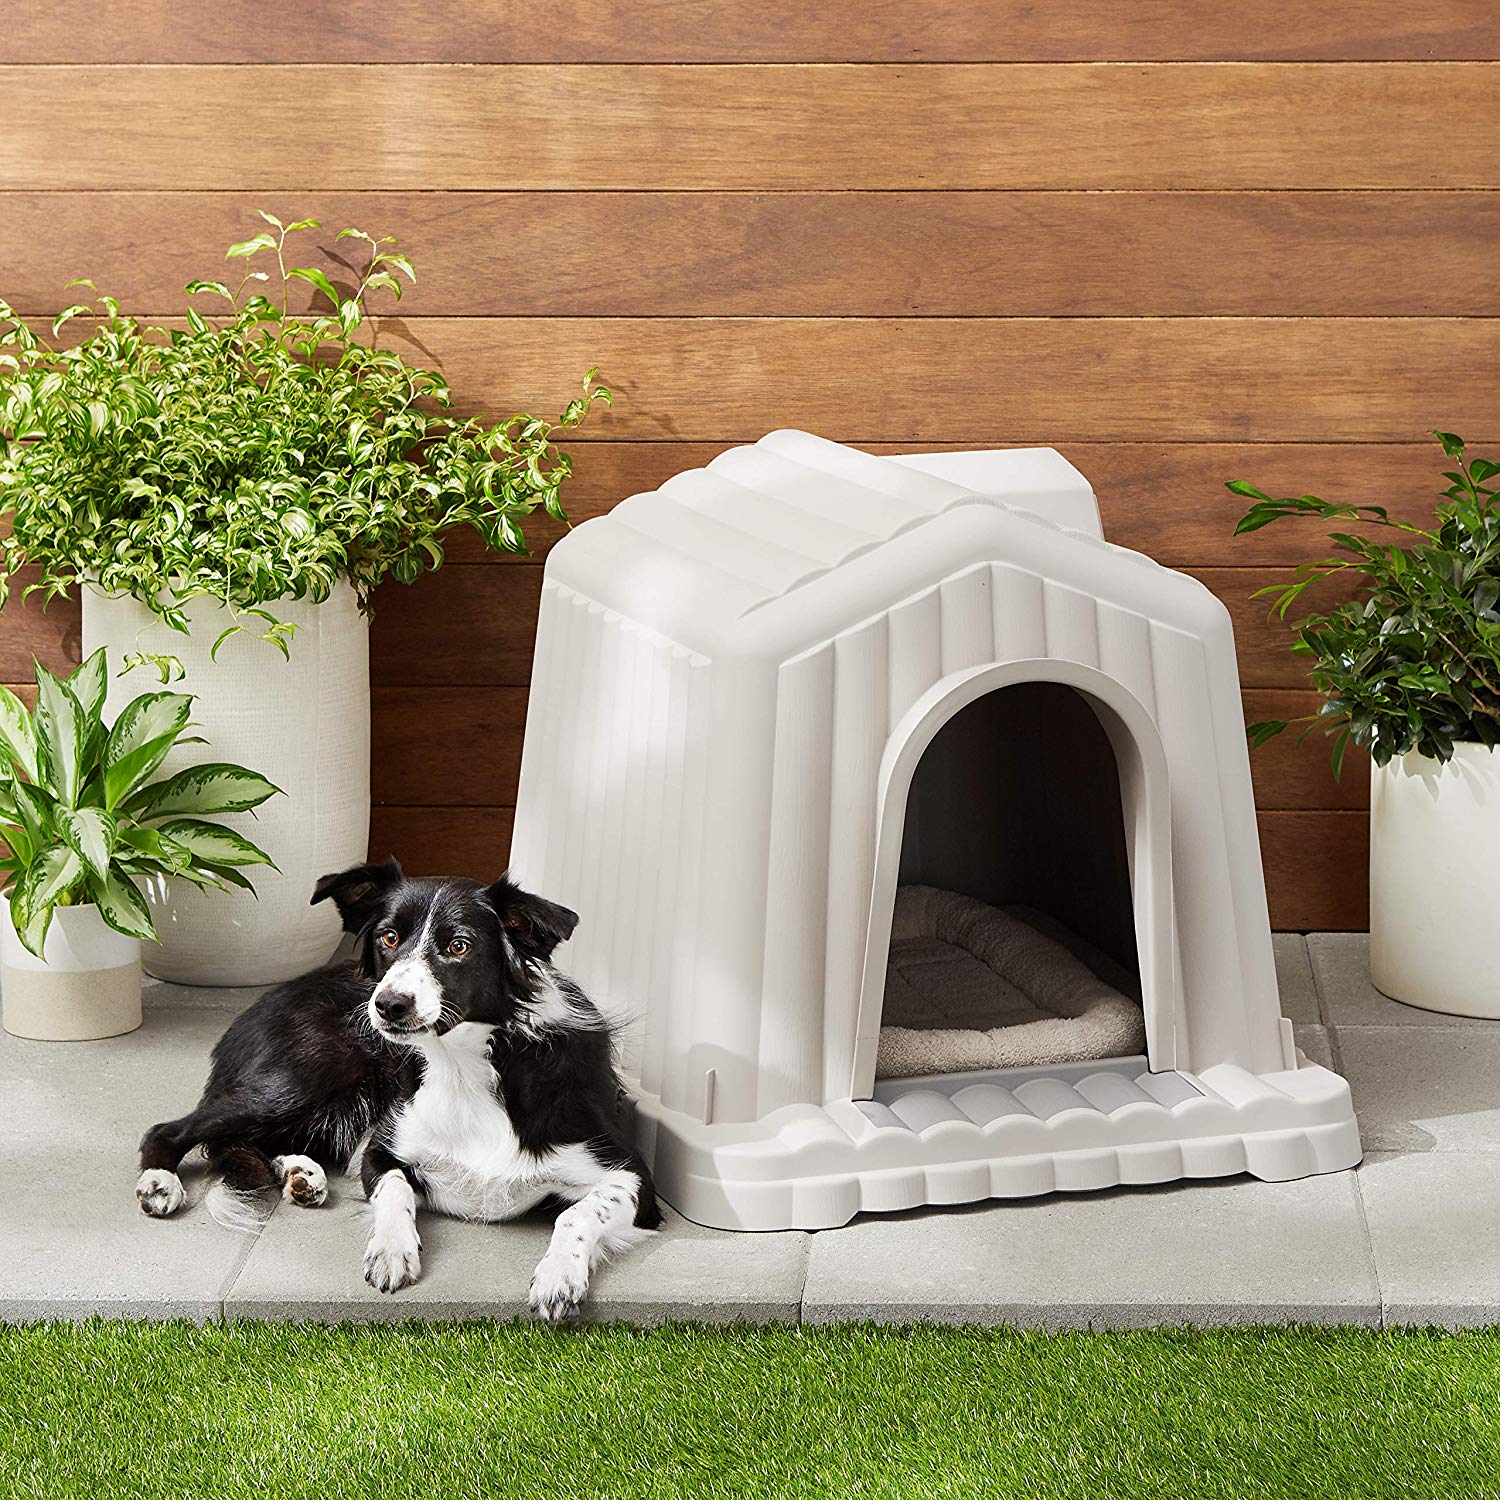 Top 10 Best Indoor Dog Houses for Medium dogs in 2020 Reviews